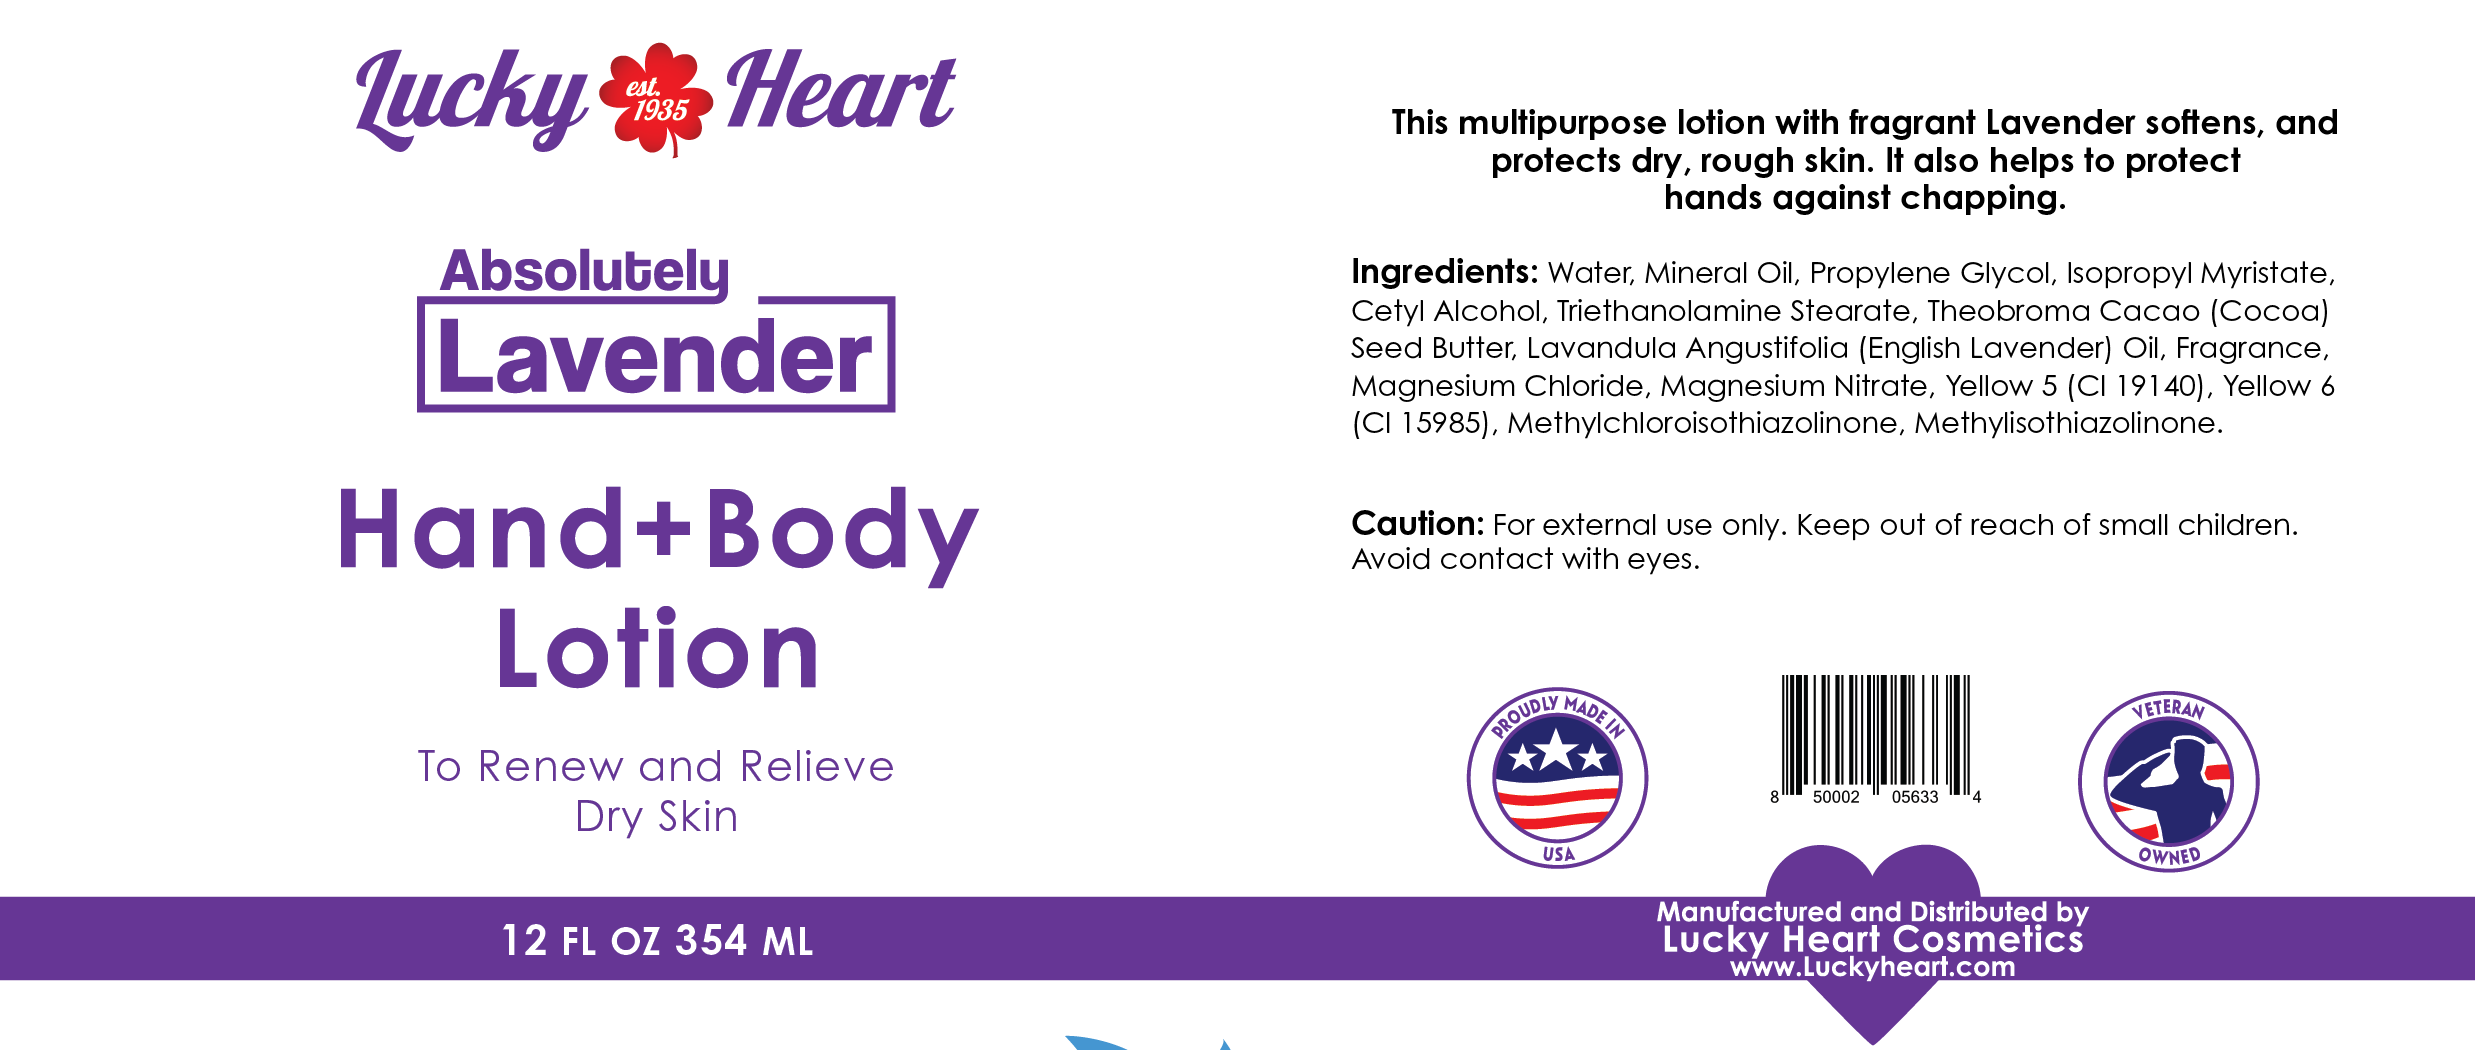 Absolutely Lavender Hand & Body Lotion